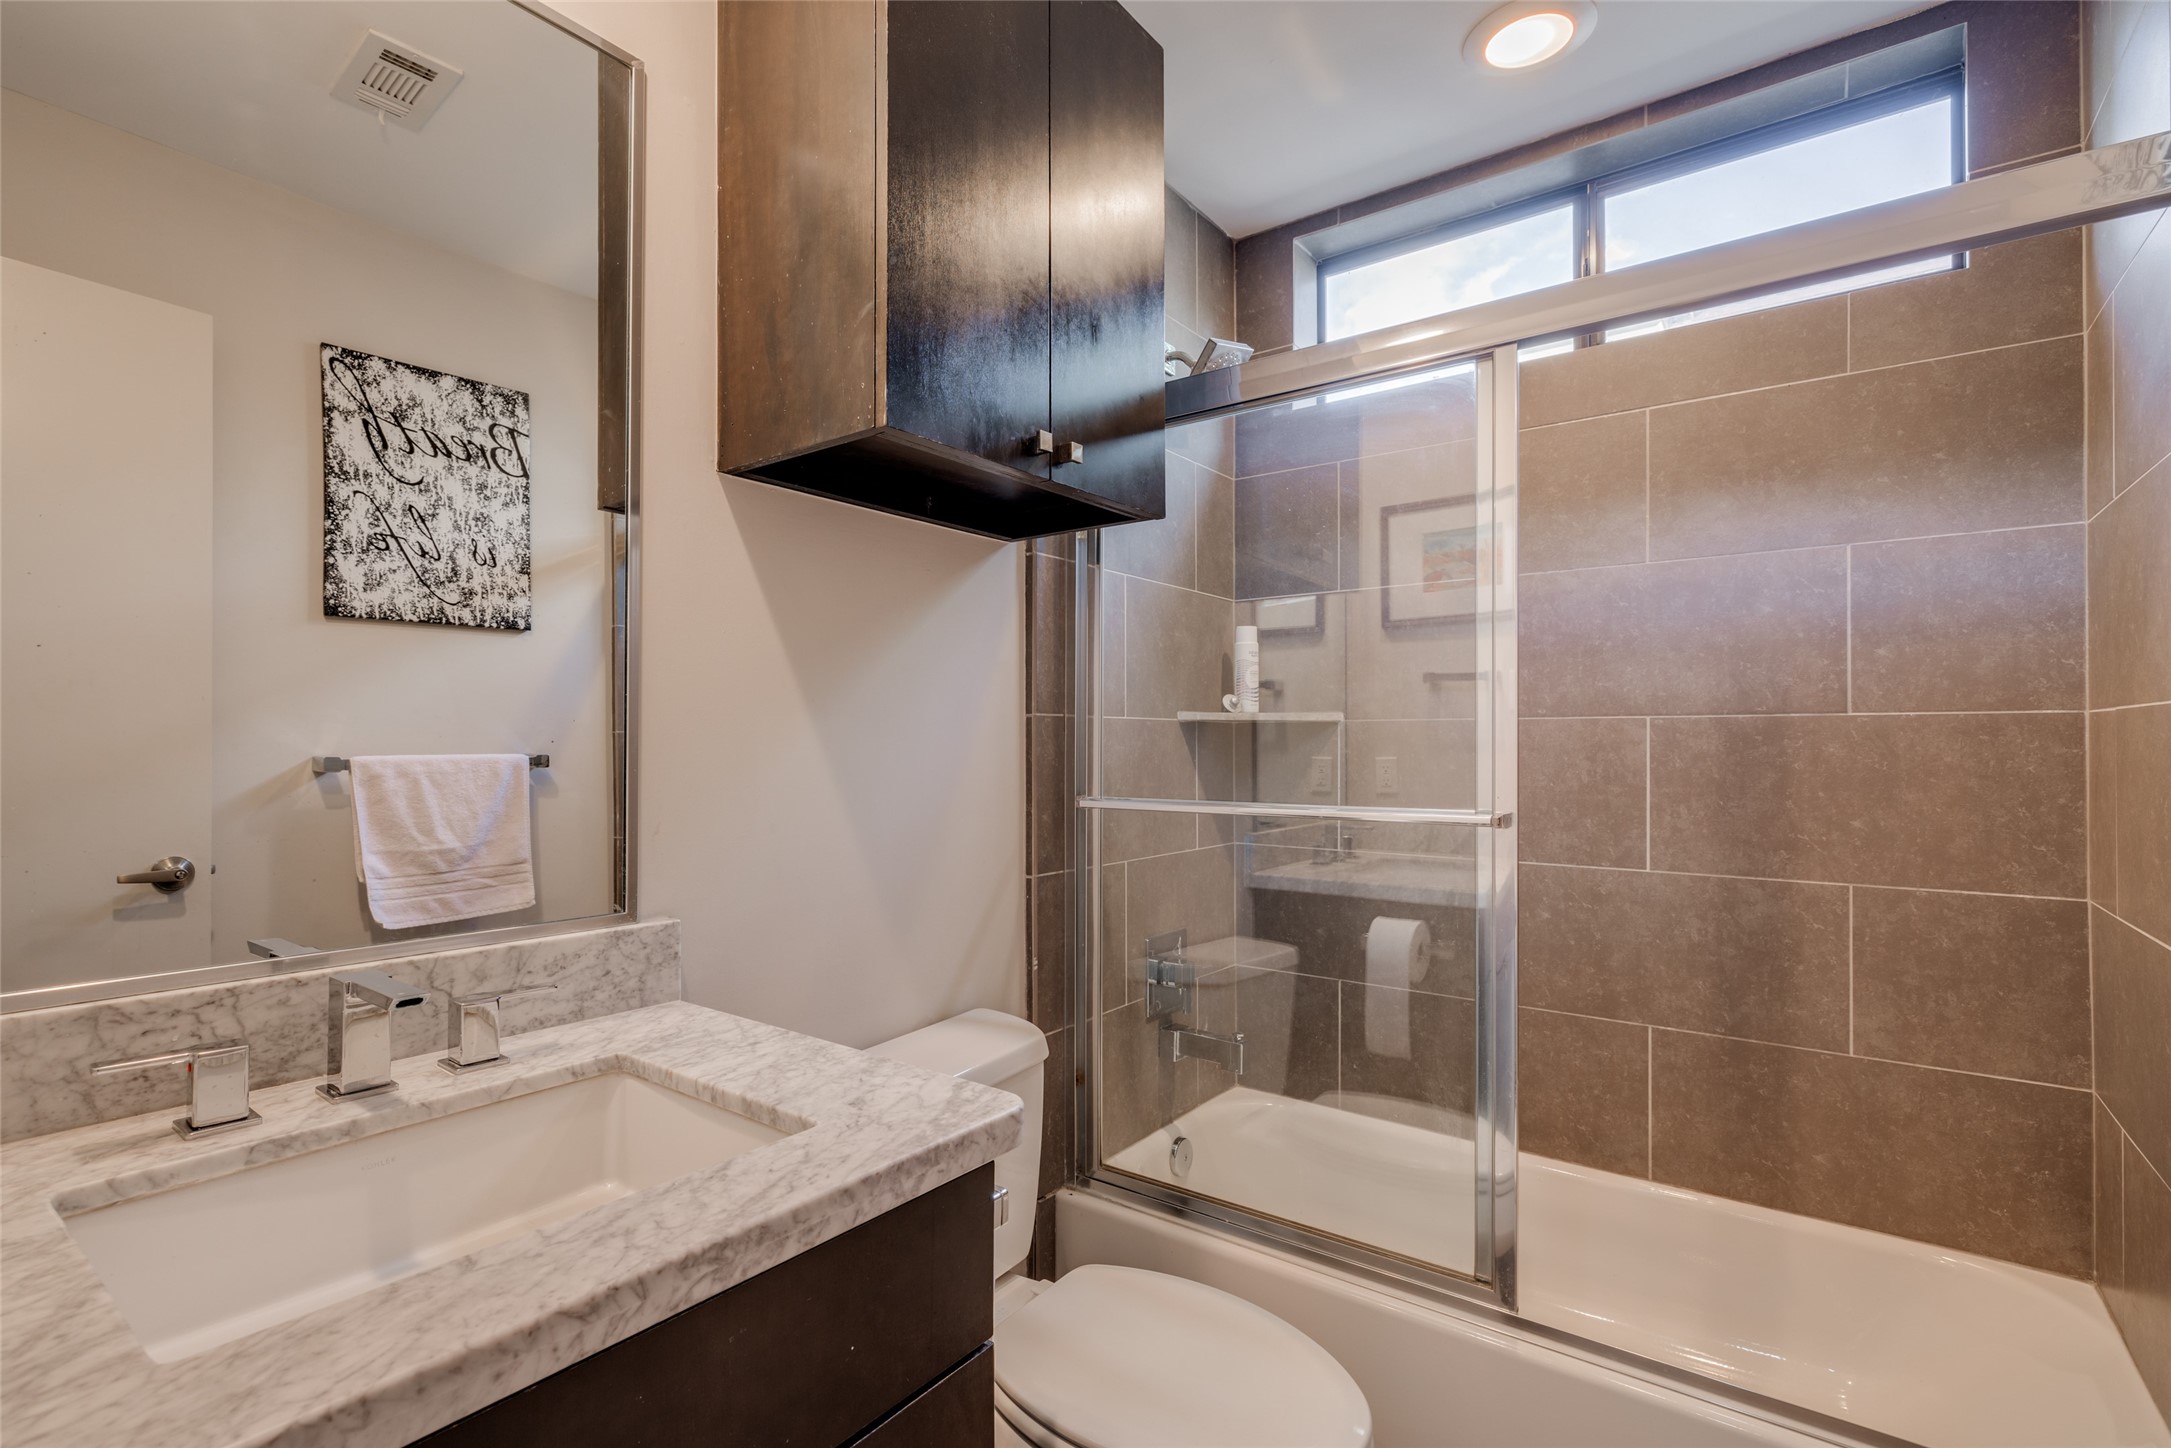 Bathroom 3 with gray floor & tub tile with shower surround, beautiful Carrera marble counter with under mounted sink, frameless mirror, dark expresso cabinet